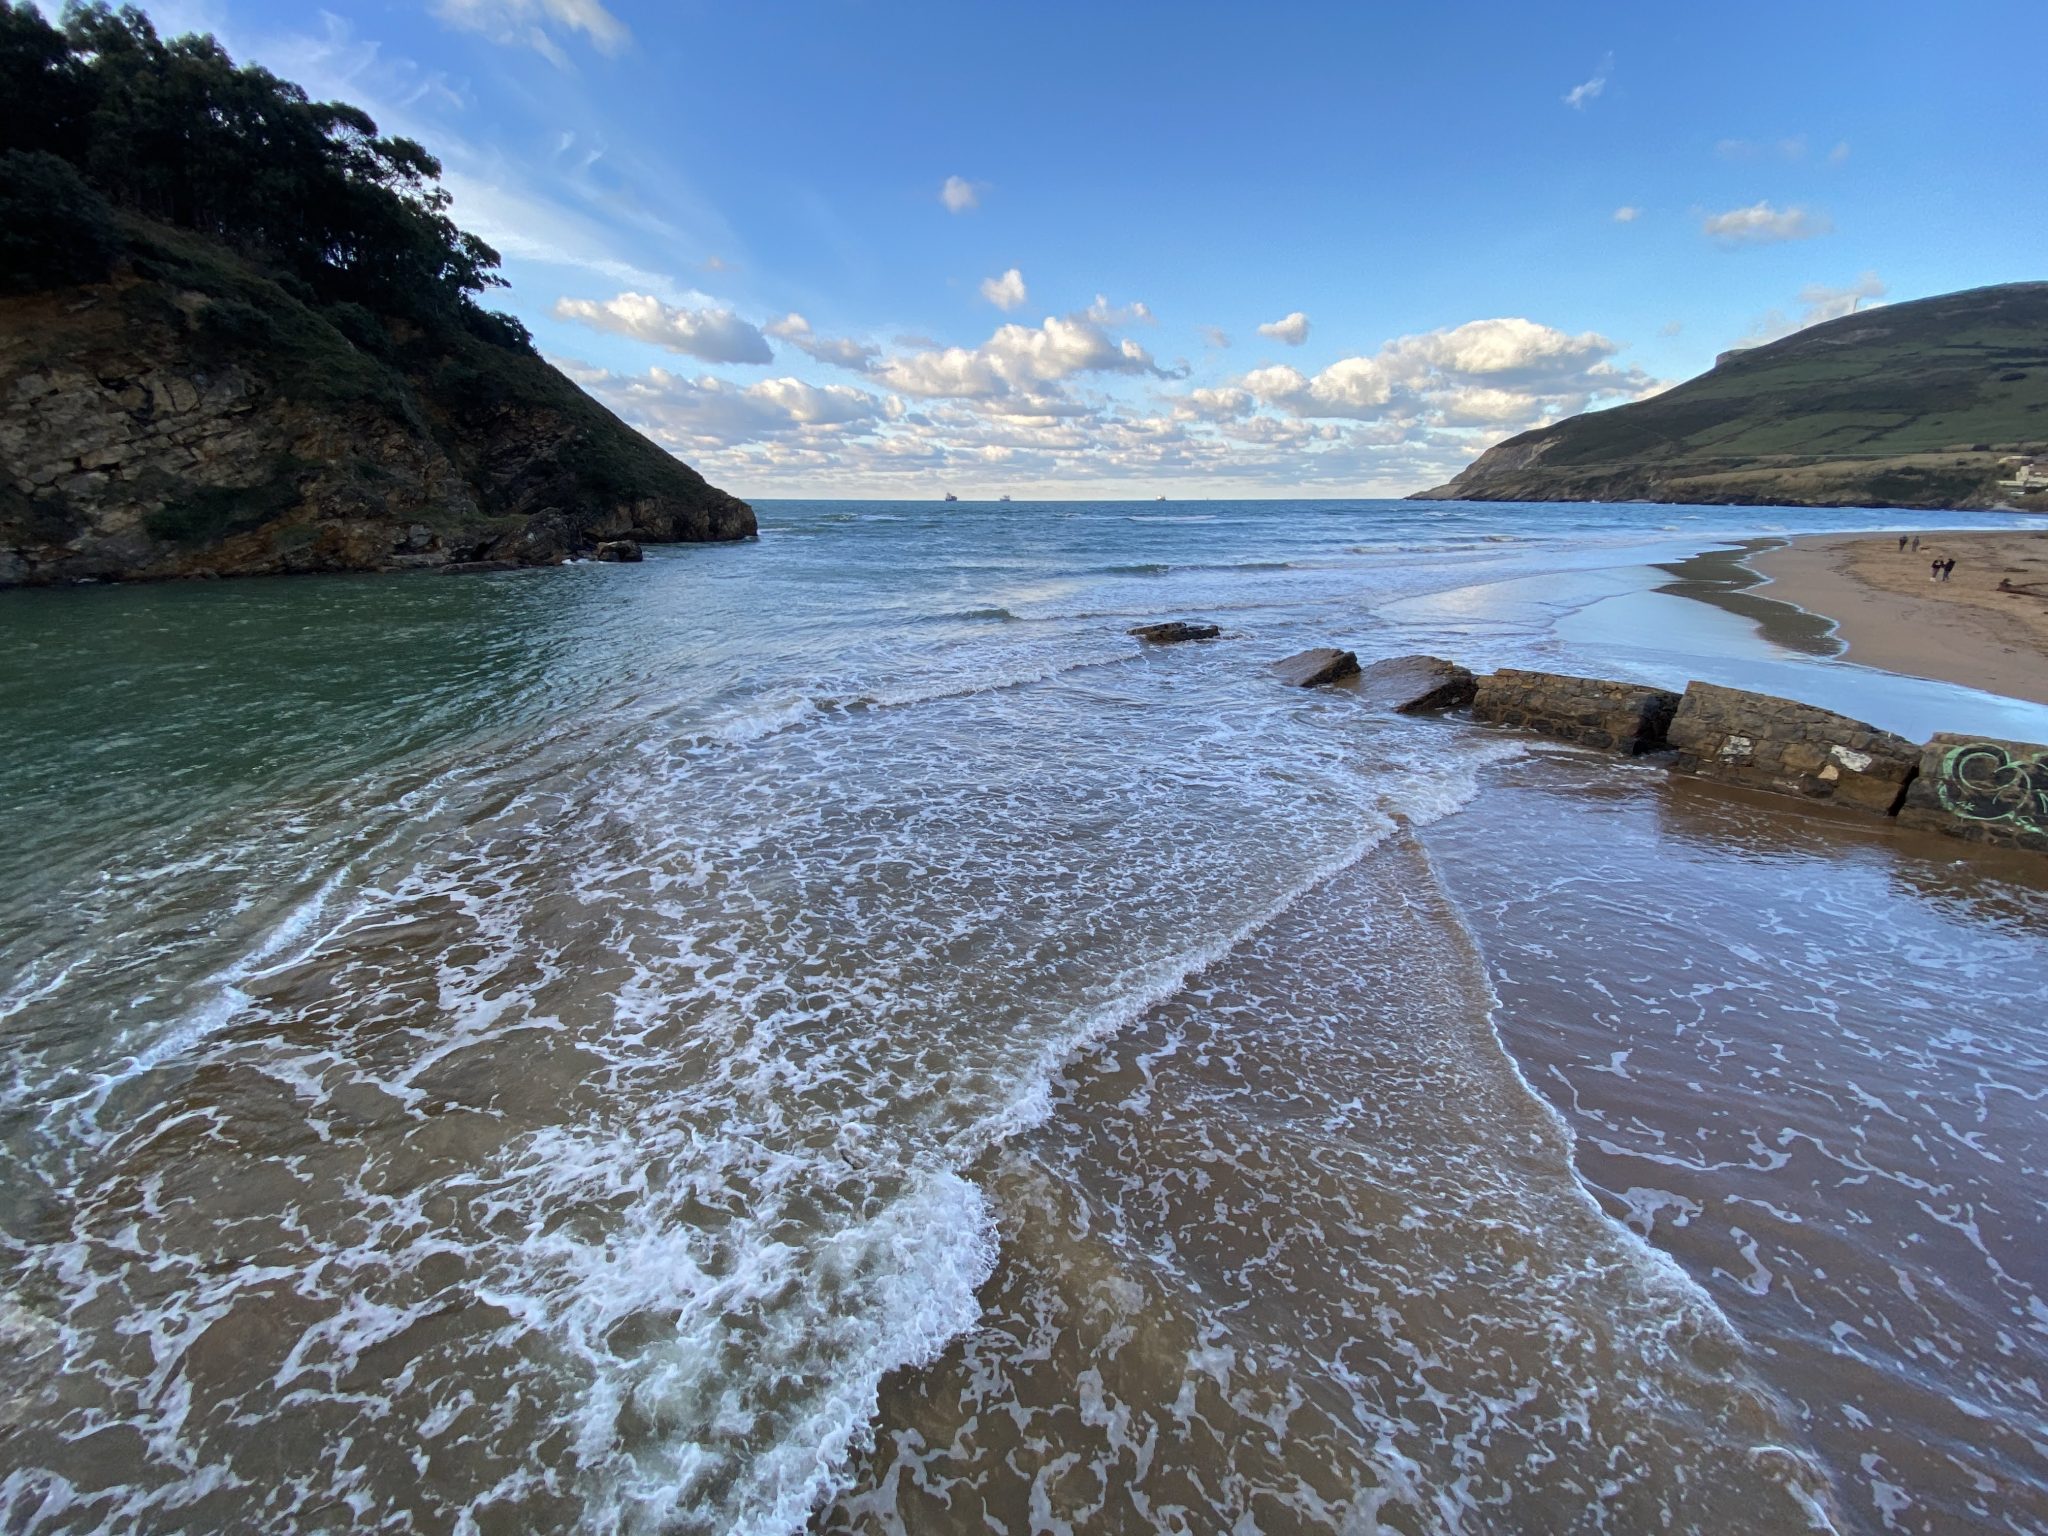 Panoramic photo of Pobeña in Bizkaia beach with the current of the sea waves reaching the sandy shore.